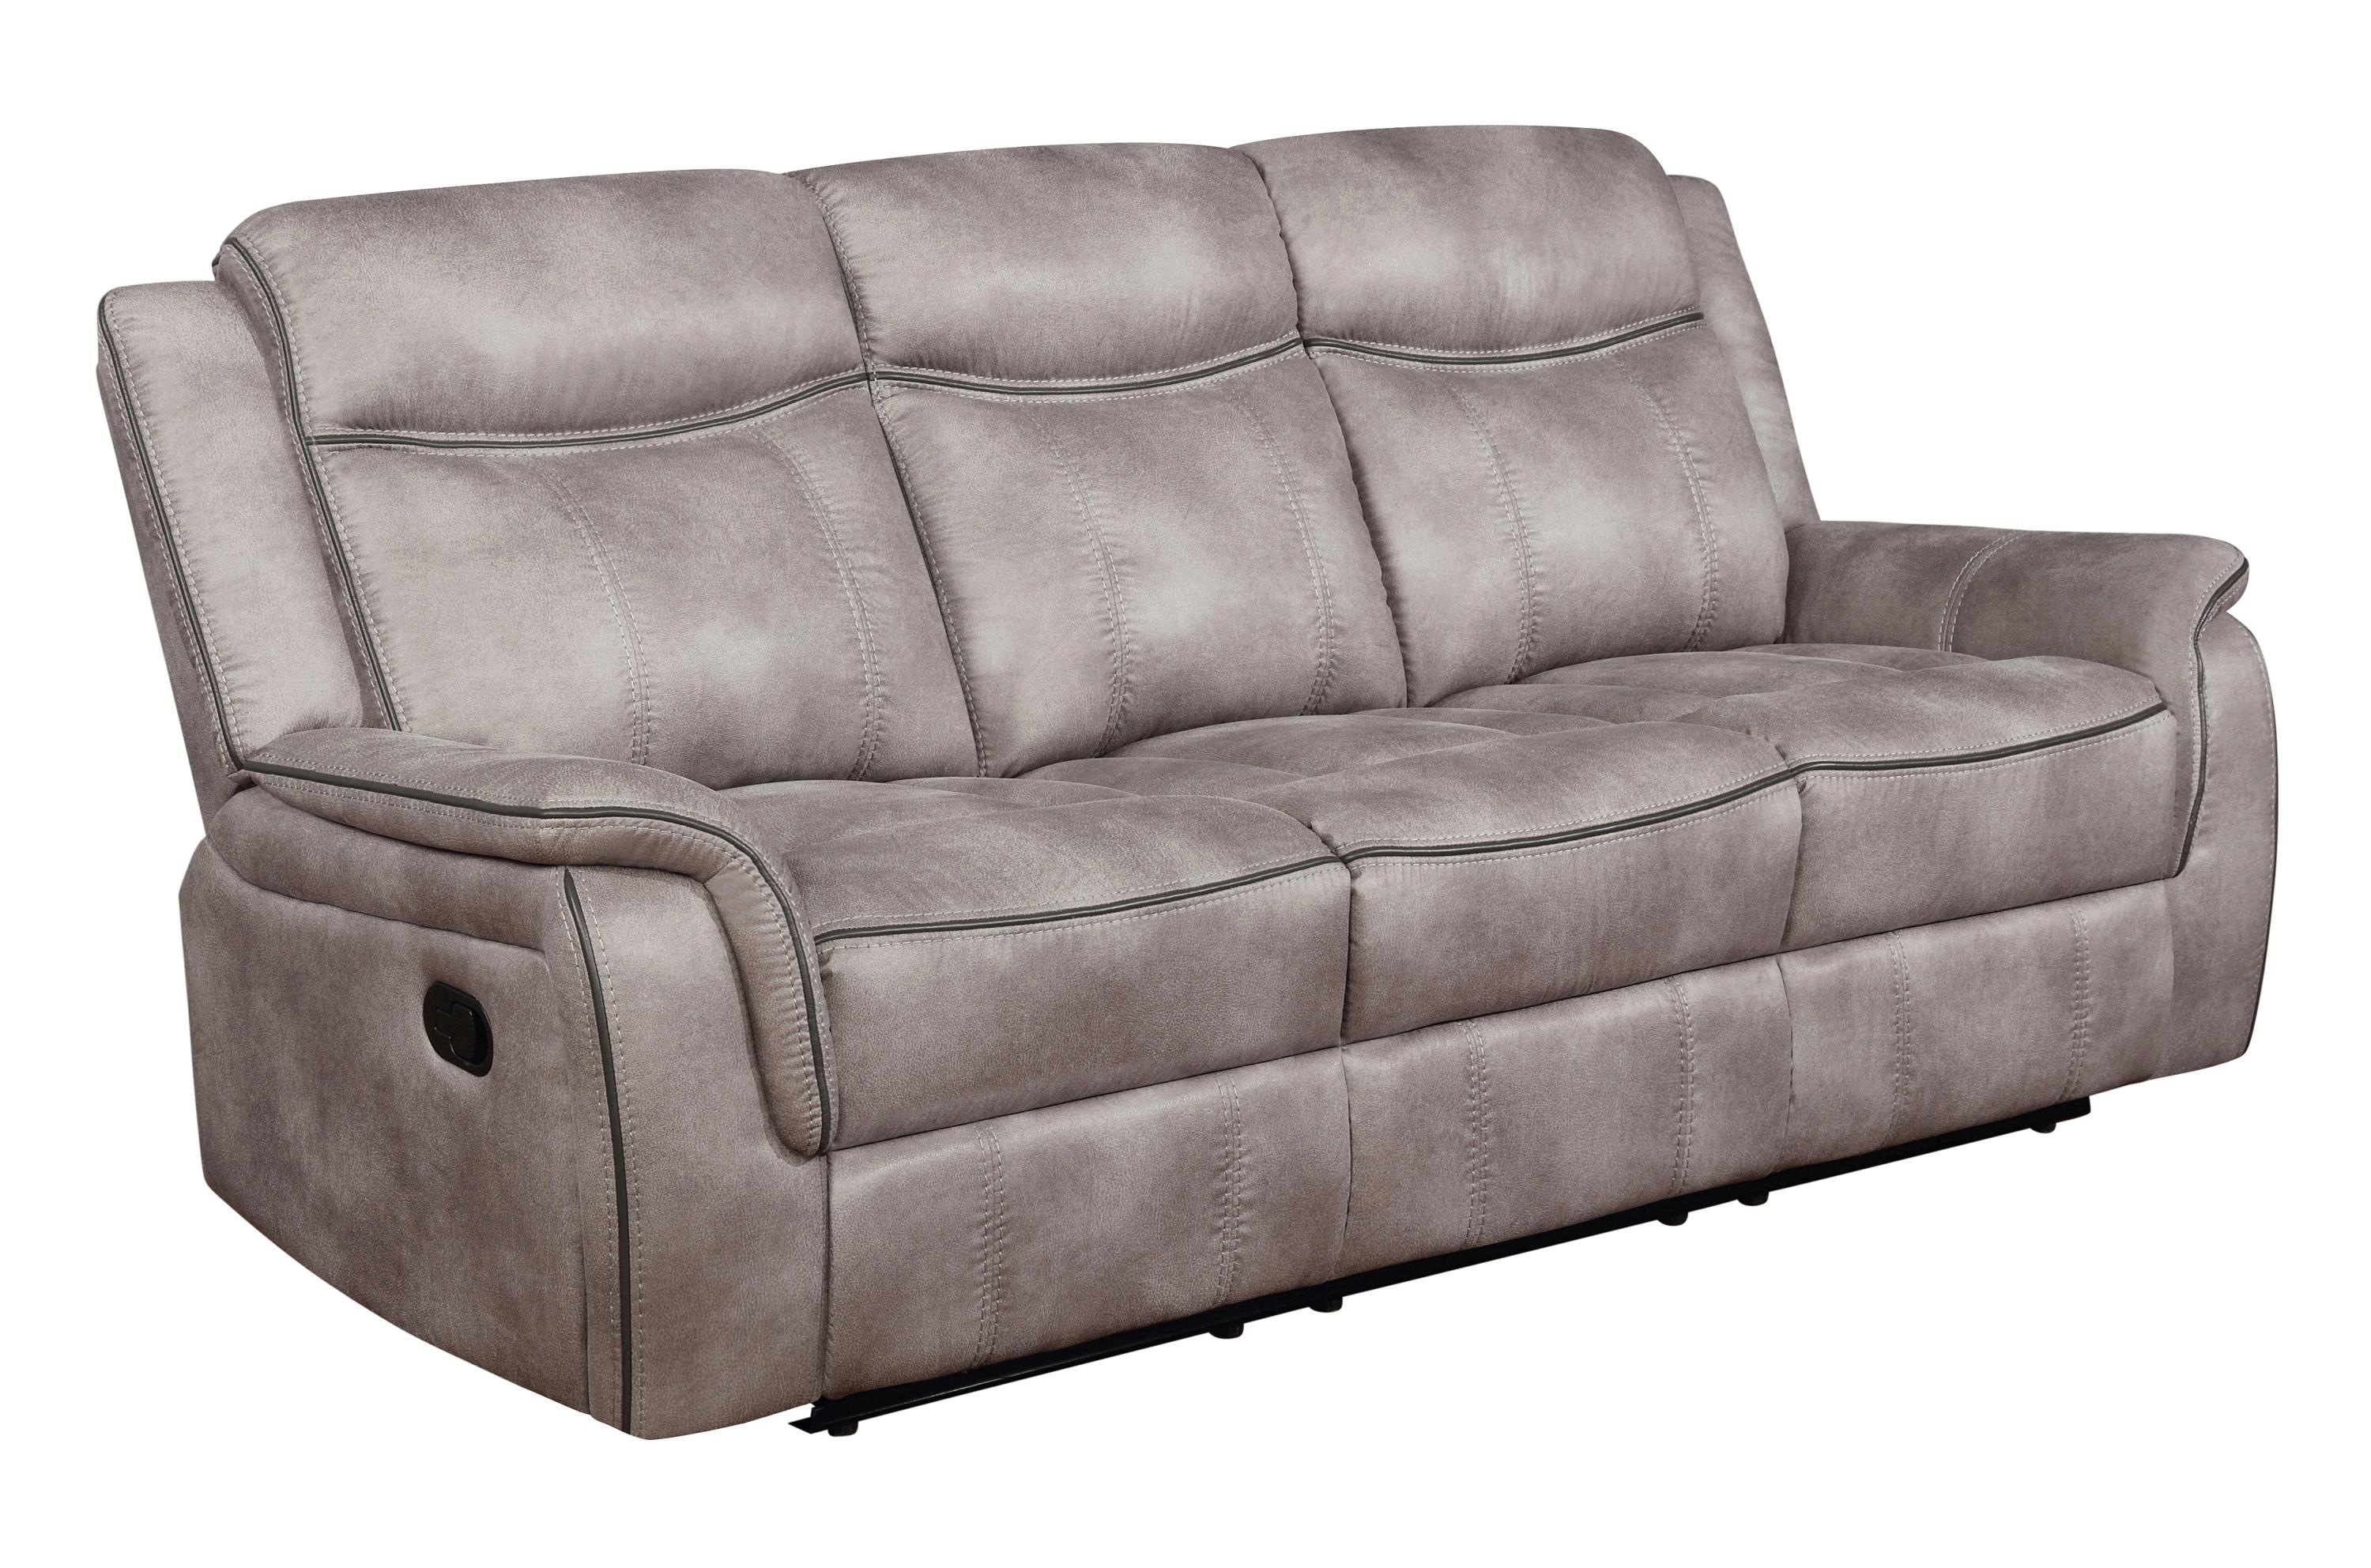 Transitional Motion Sofa 603501 Lawrence 603501 in Taupe 